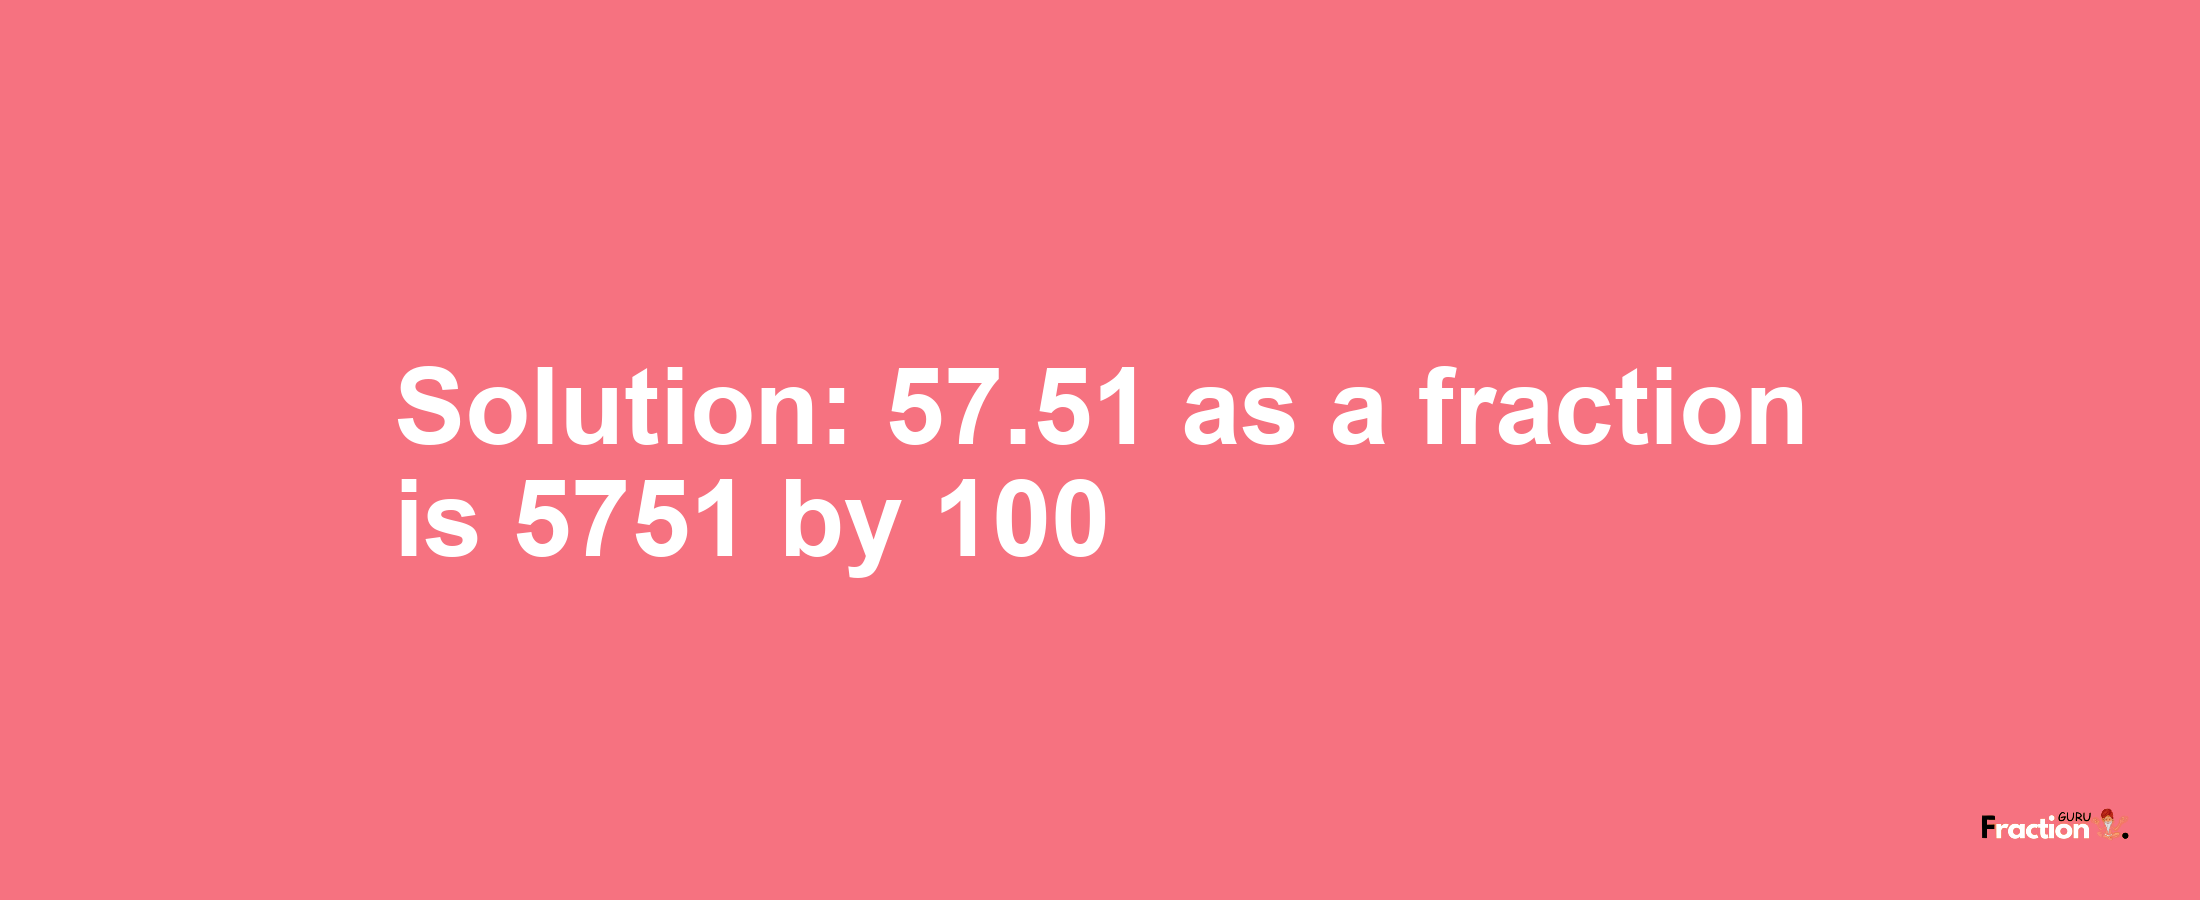 Solution:57.51 as a fraction is 5751/100